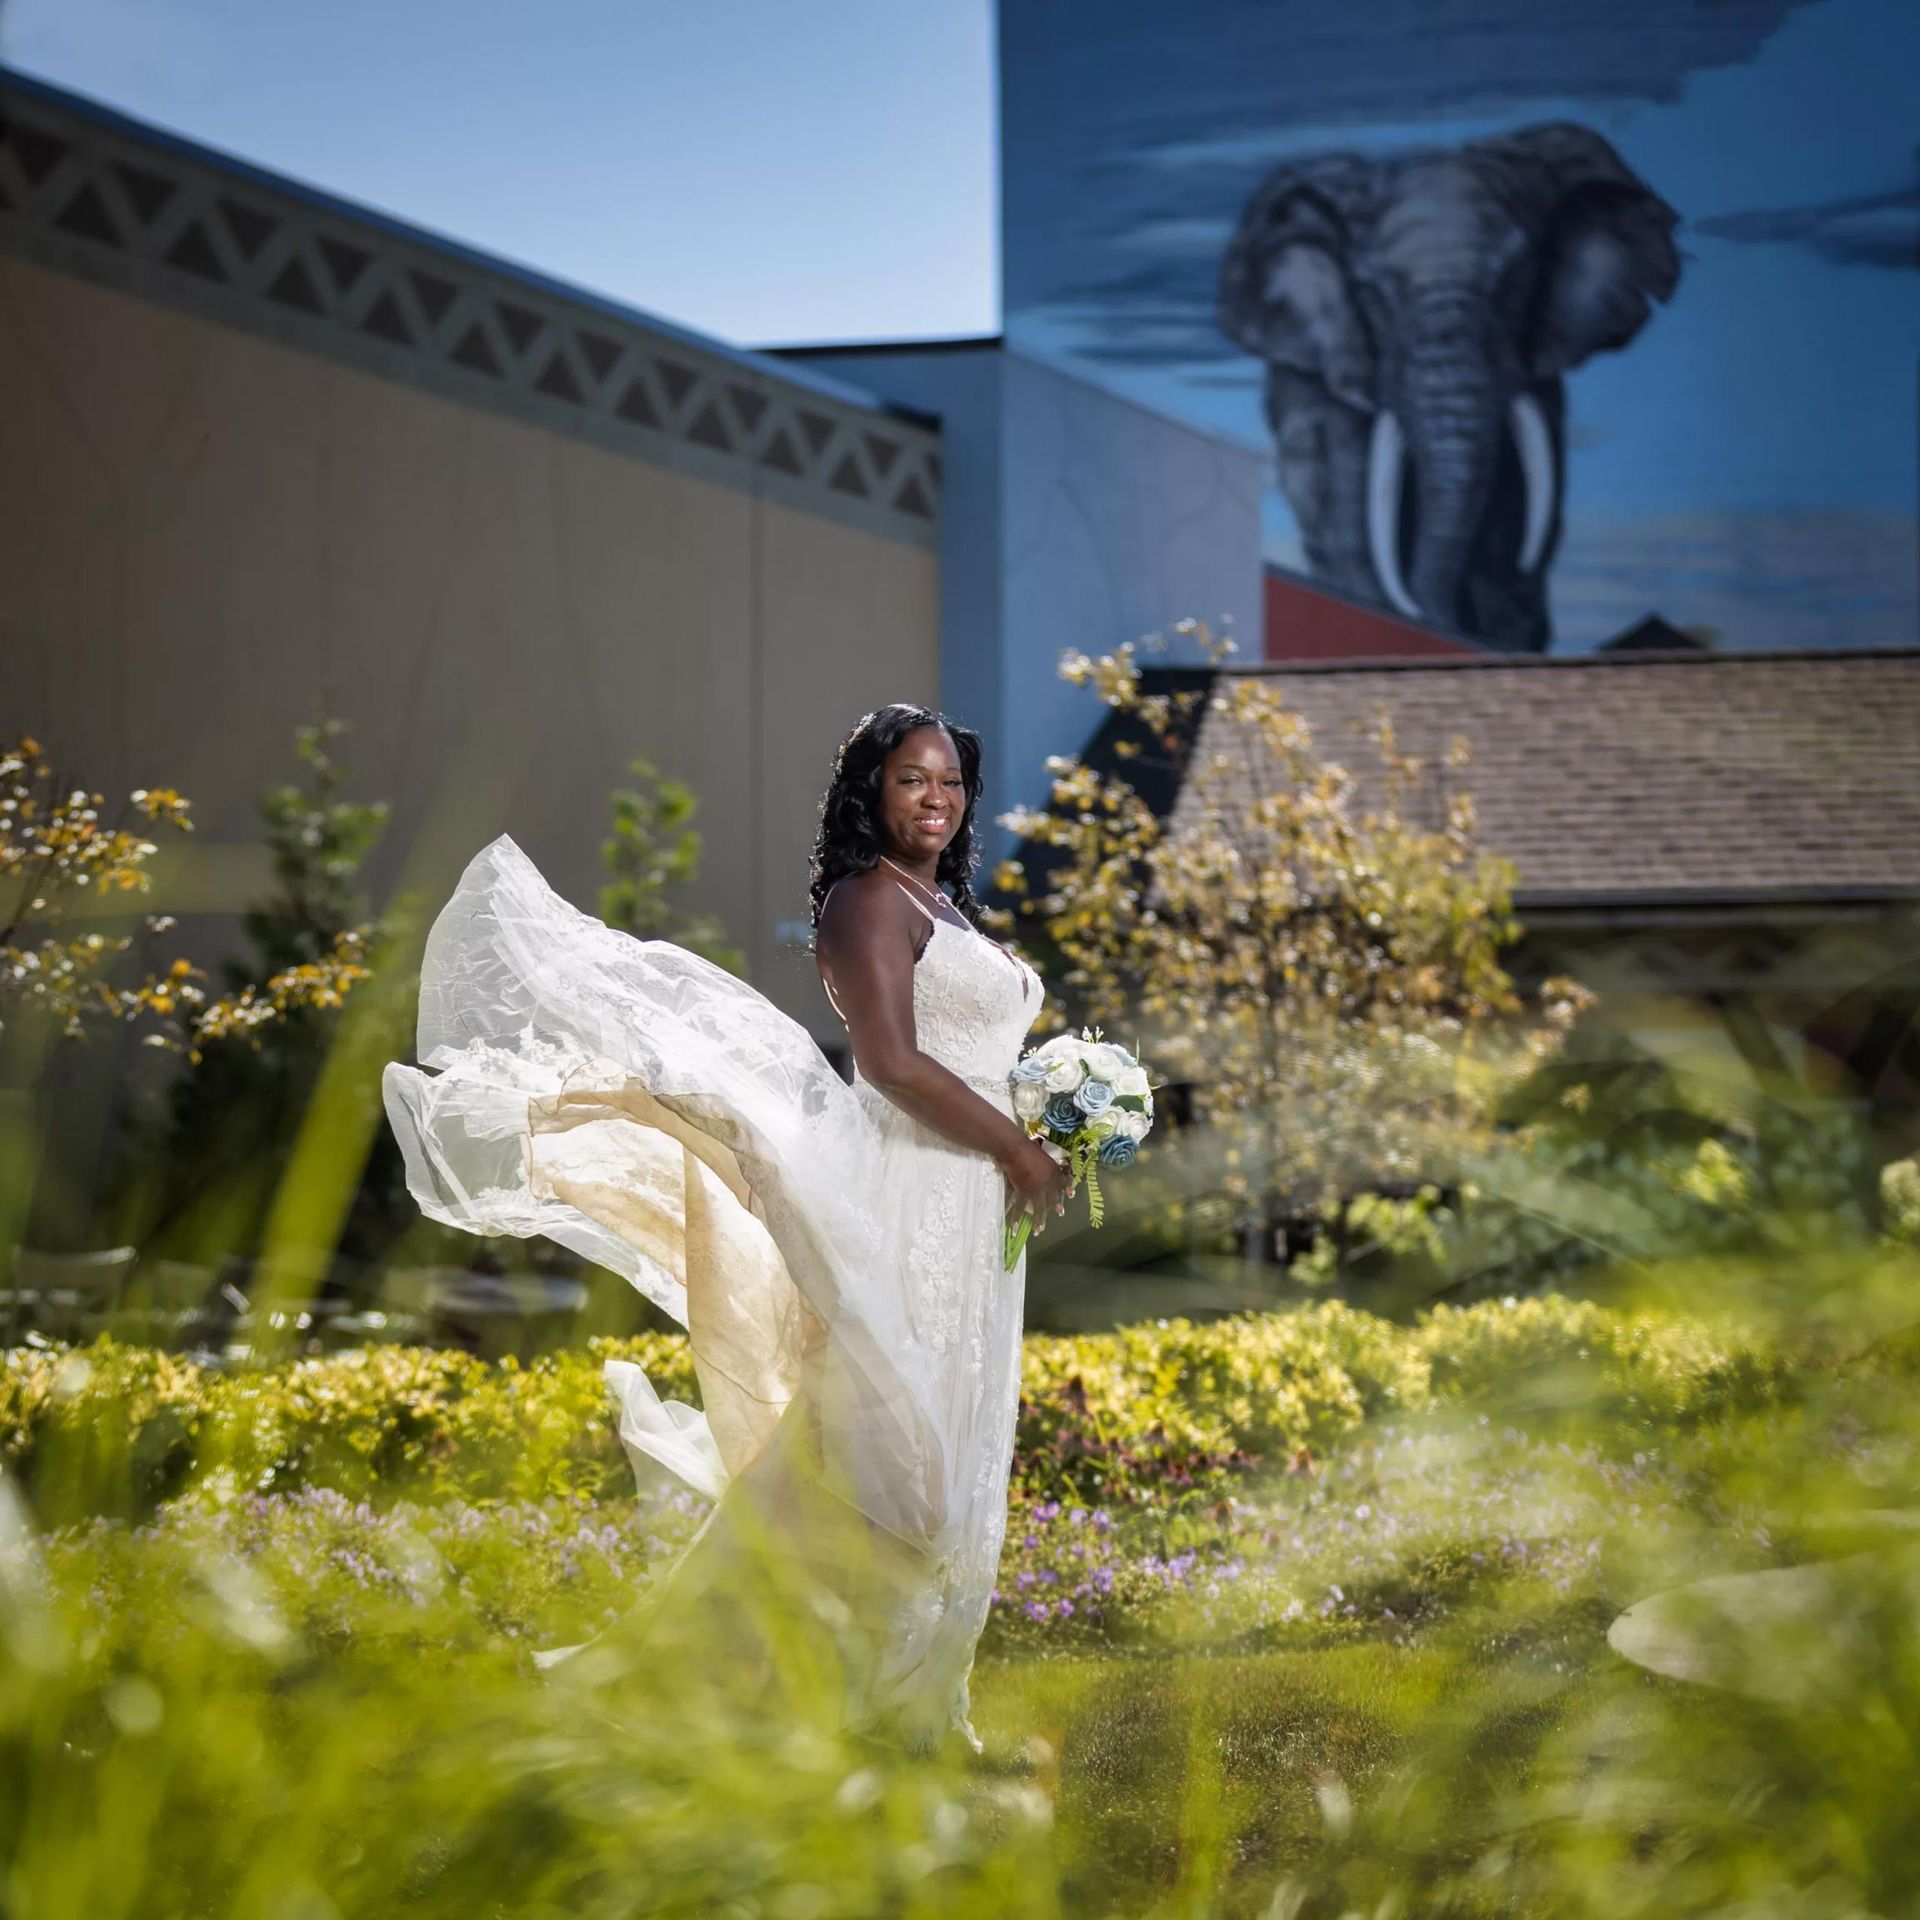 A woman in a white dress is standing in a field with an elephant mural in the background.